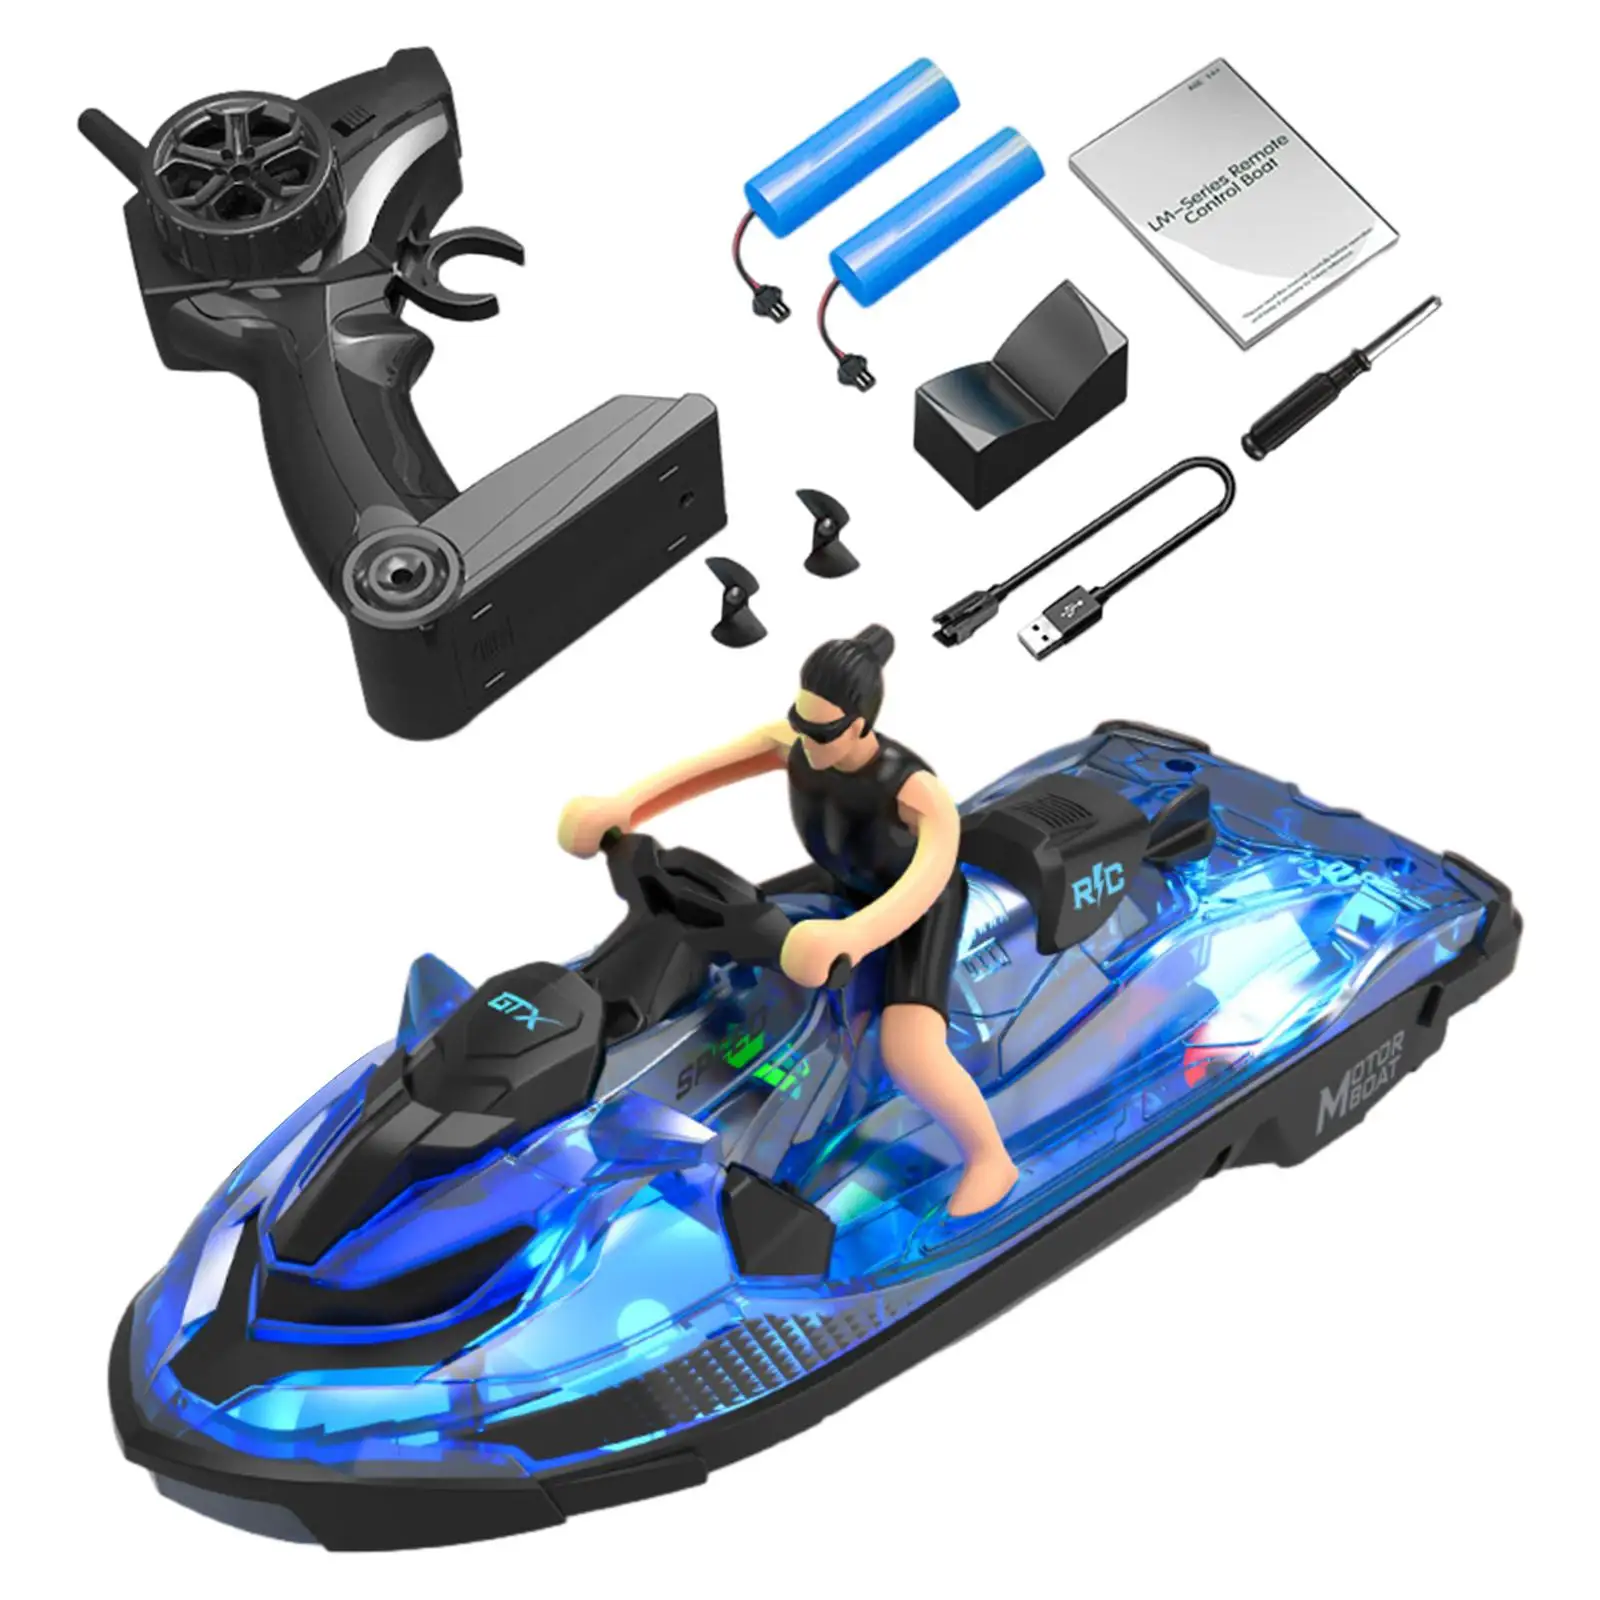 RC Speed Boat Ship Toy 2 Gears Speed Adjustment with Light Simulation Pools and Lakes Fast Remote Control Boat for Kids Gifts